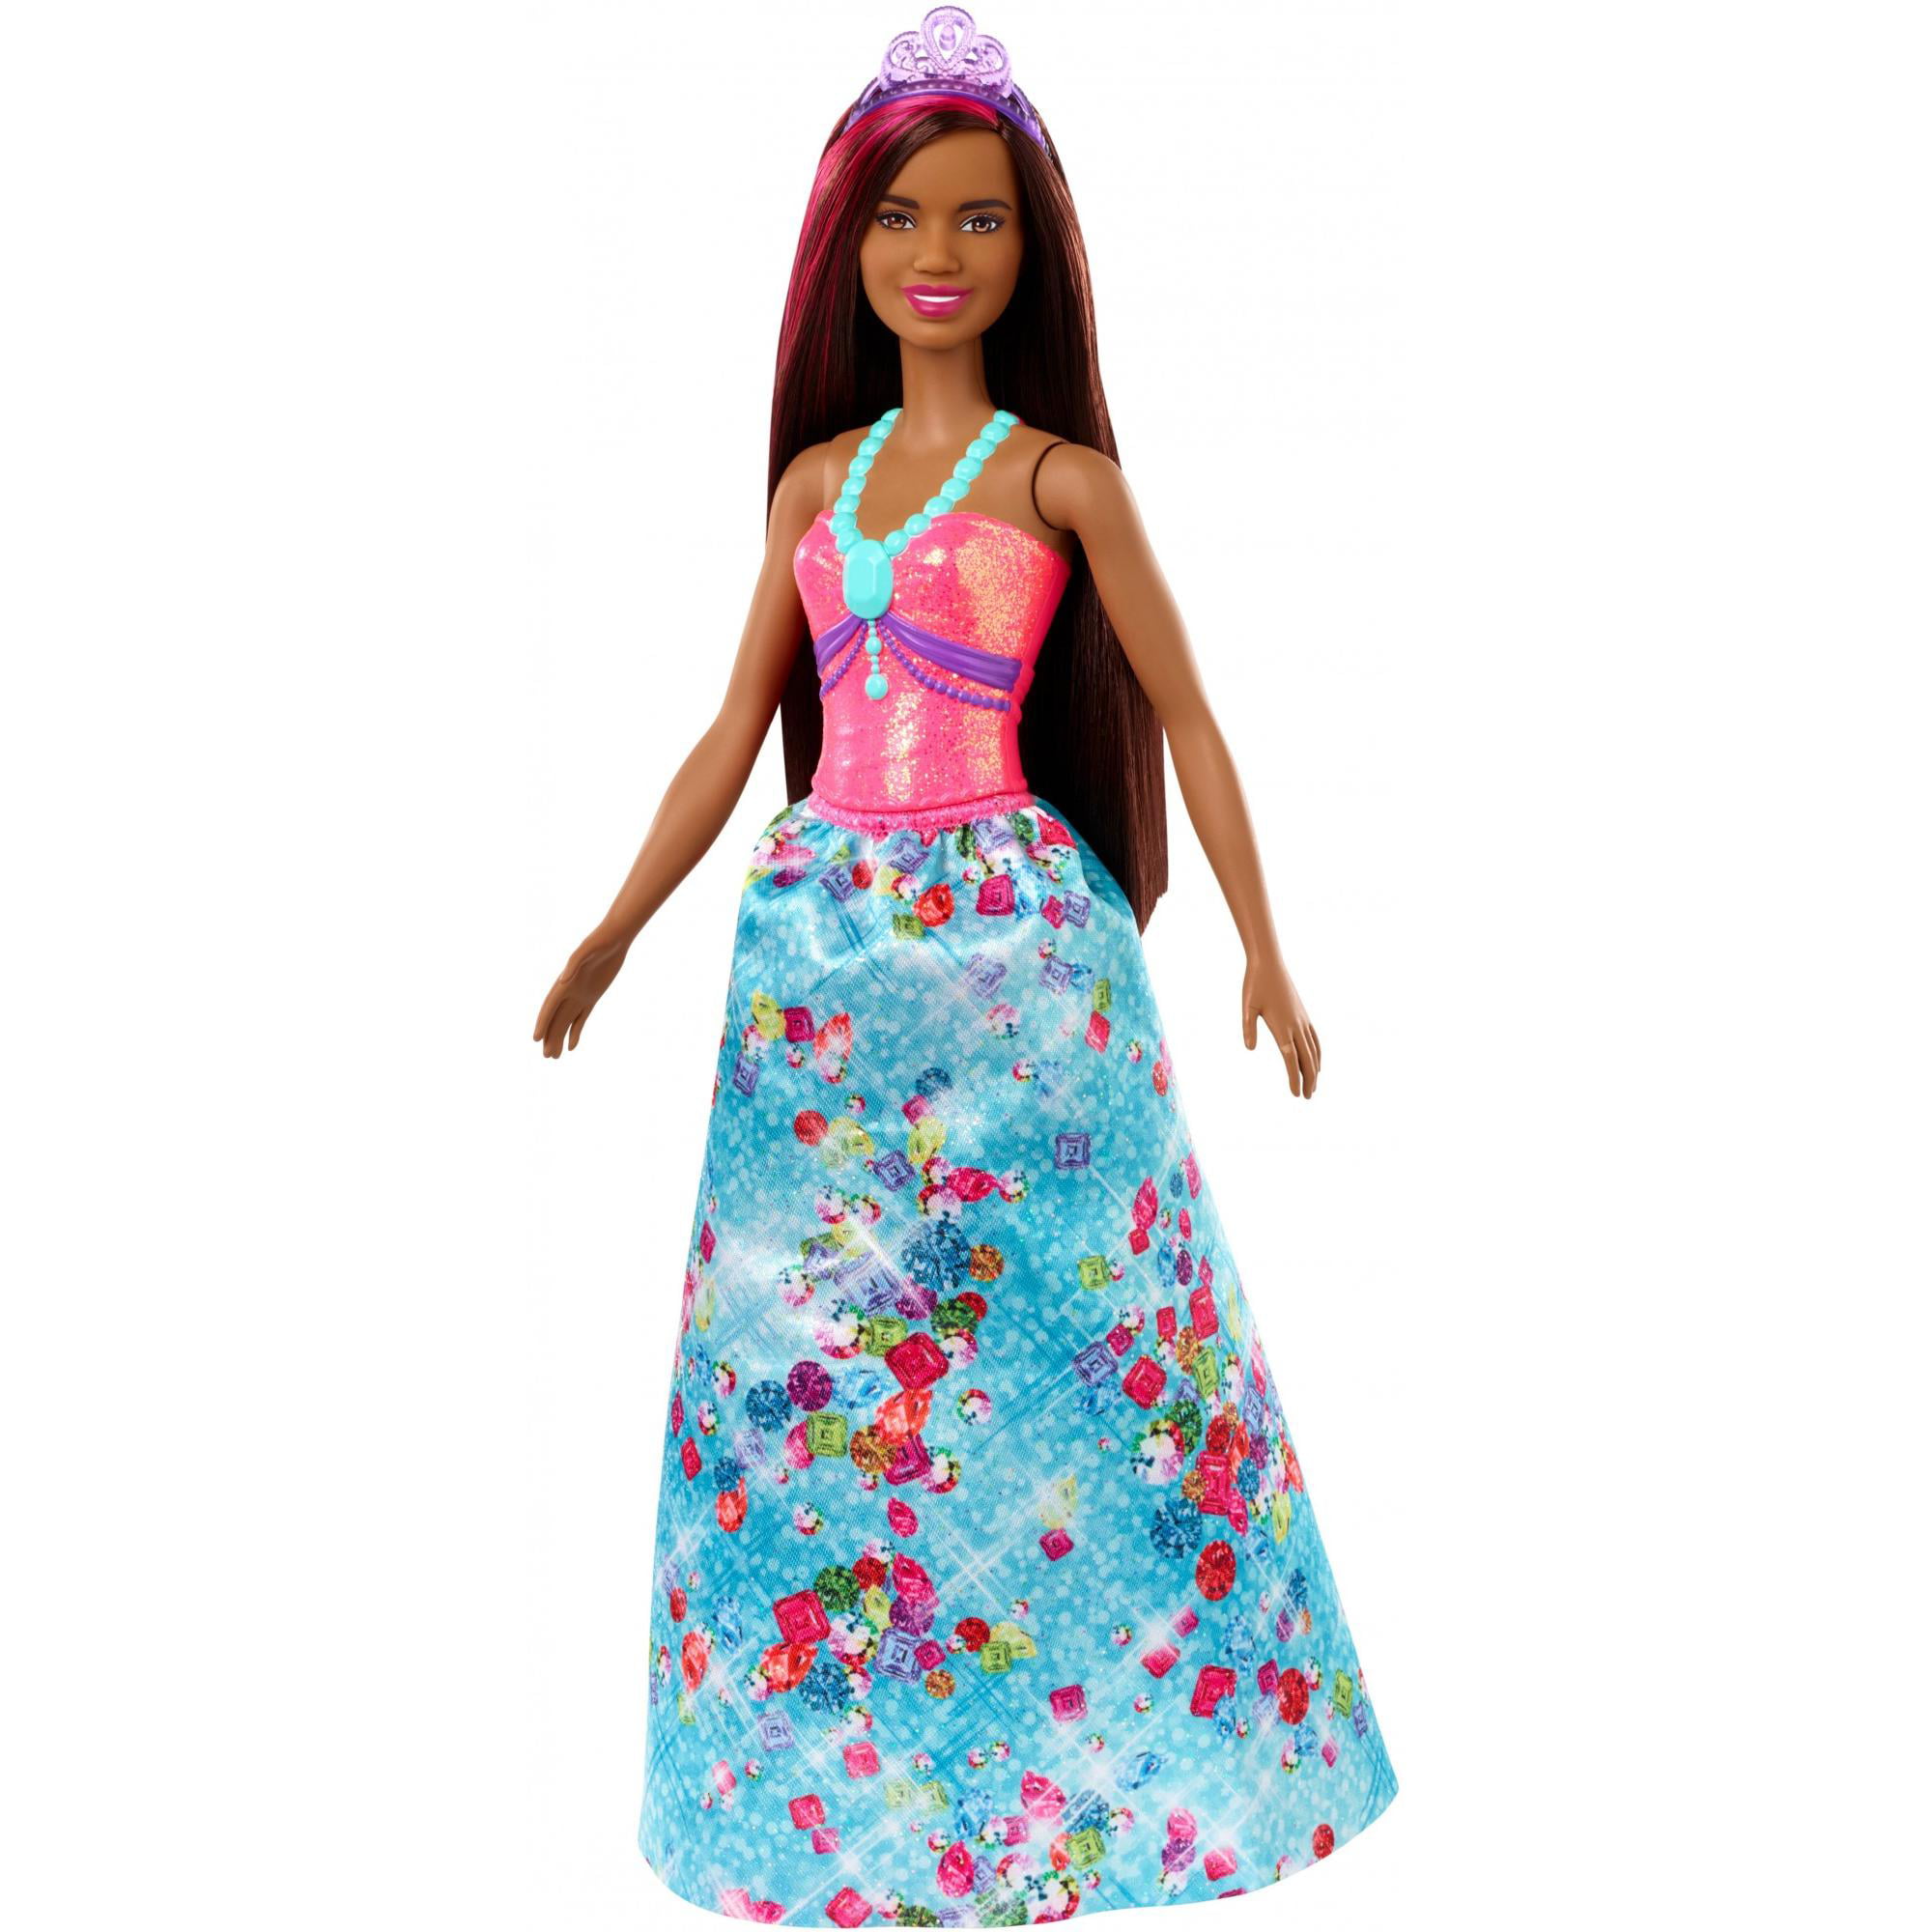 A Light Pink Dress with Lots of Sparkle Made to Fit the Barbie Doll 